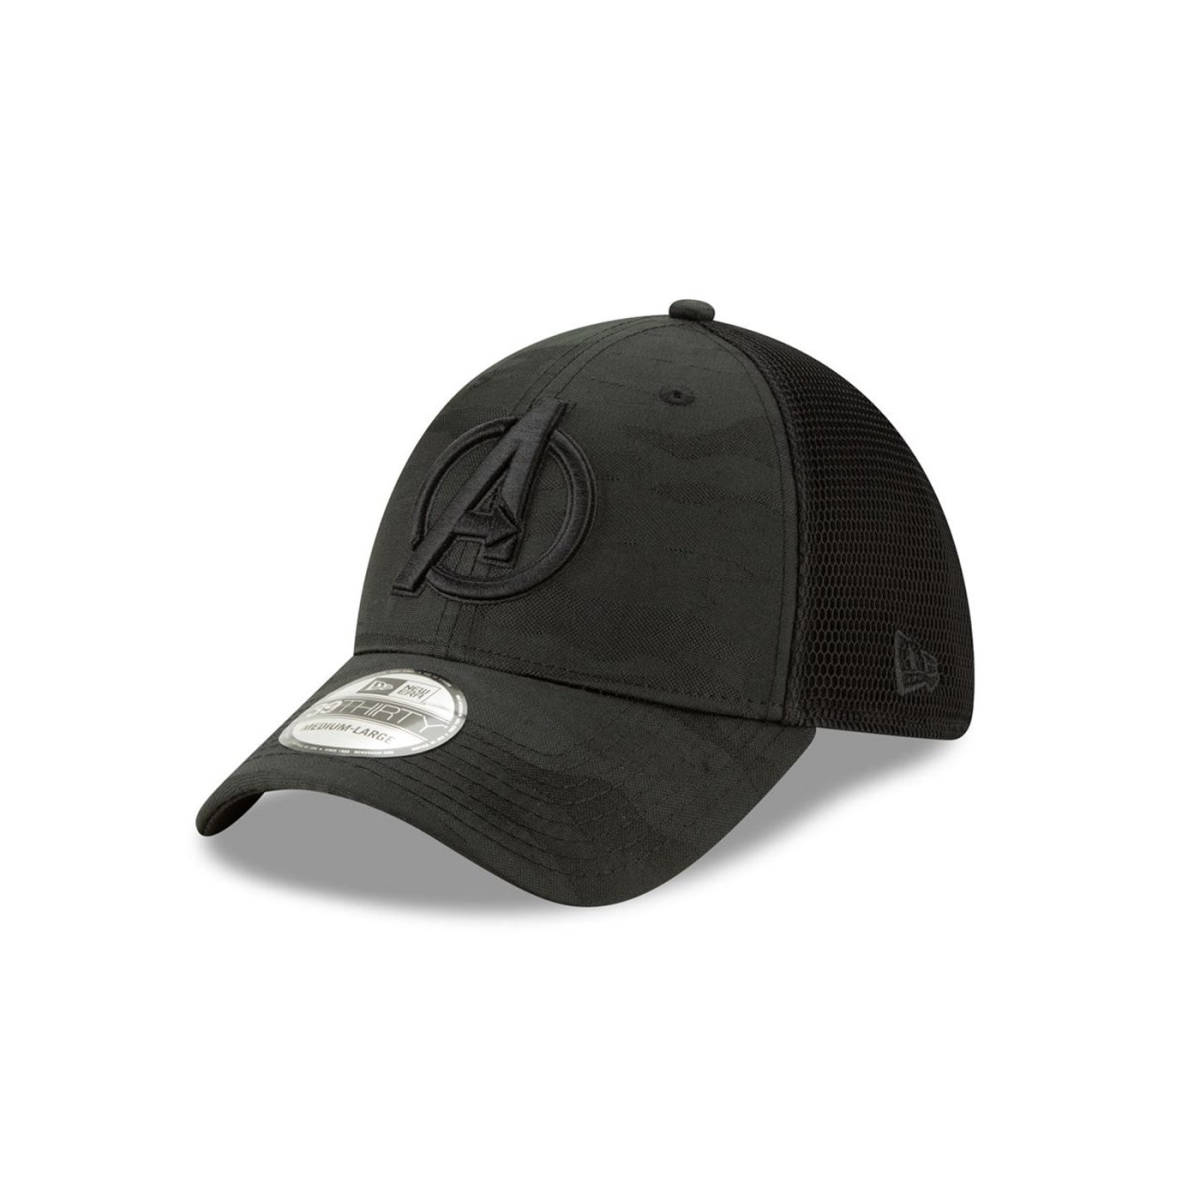 Picture of Avengers Endgame 111495-s-m-Small-Medium Avengers Endgame Symbol Camo New Era 39 Thirty Fitted Hat - Small & Medium